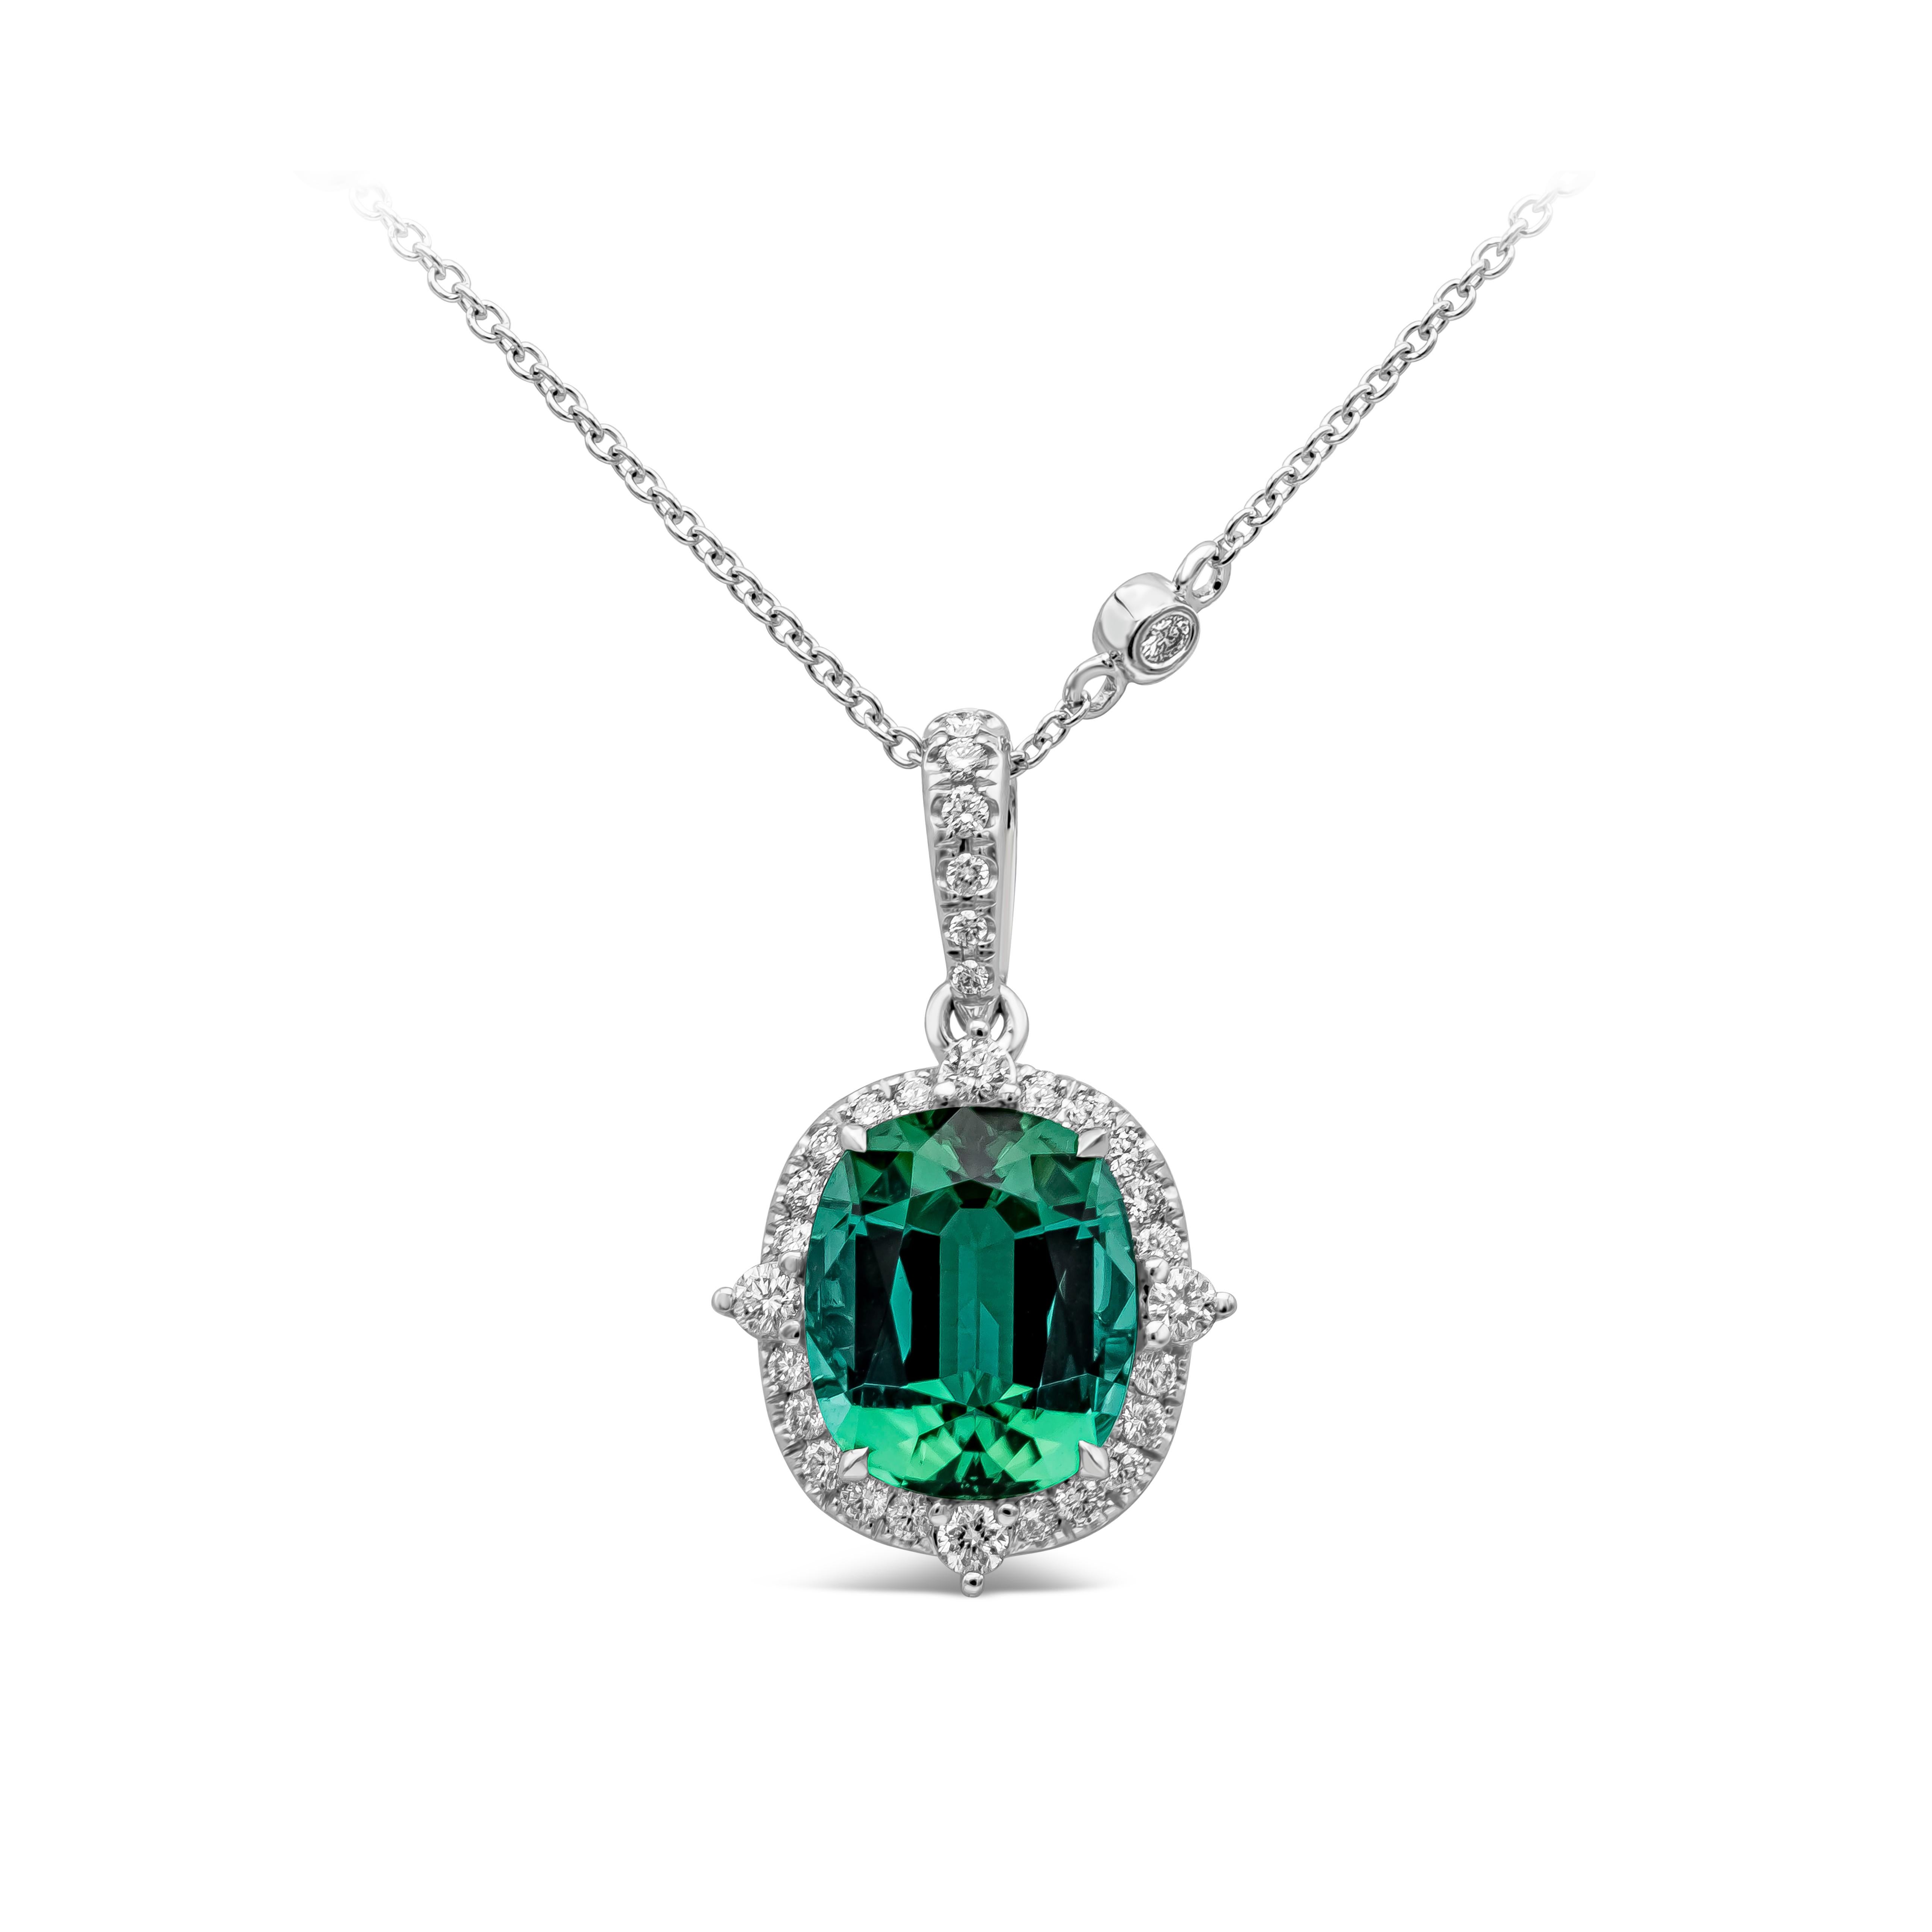 A fashionable pendant necklace showcasing a cushion cut blue green tourmaline weighing 5 carat. Center stone is accented with bright round diamonds weighing 0.95 carats total, F/G color and VS clarity. Chain has 0.52 carats total brilliant round